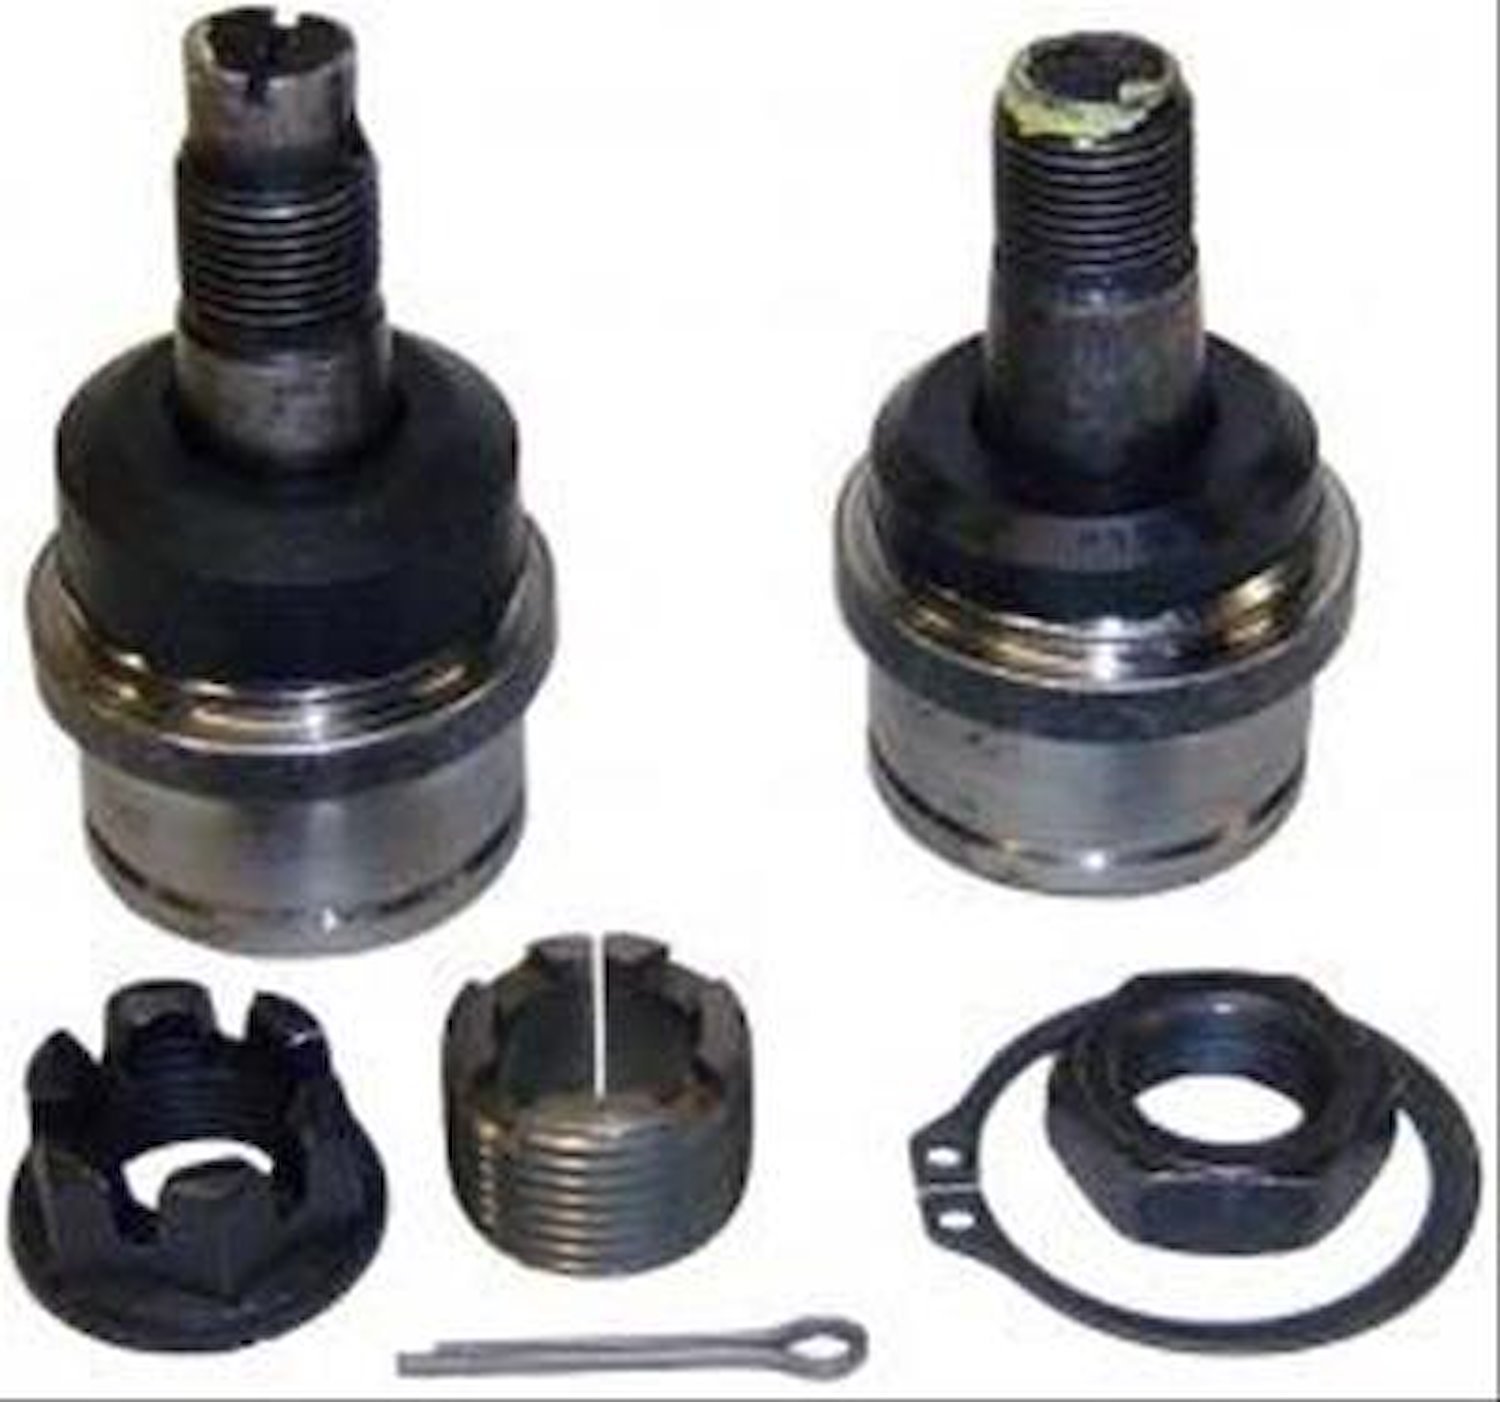 Suspension Ball Joint Kit Fits Select AMC, Dodge, Ford, GM, International, Jeep Applications